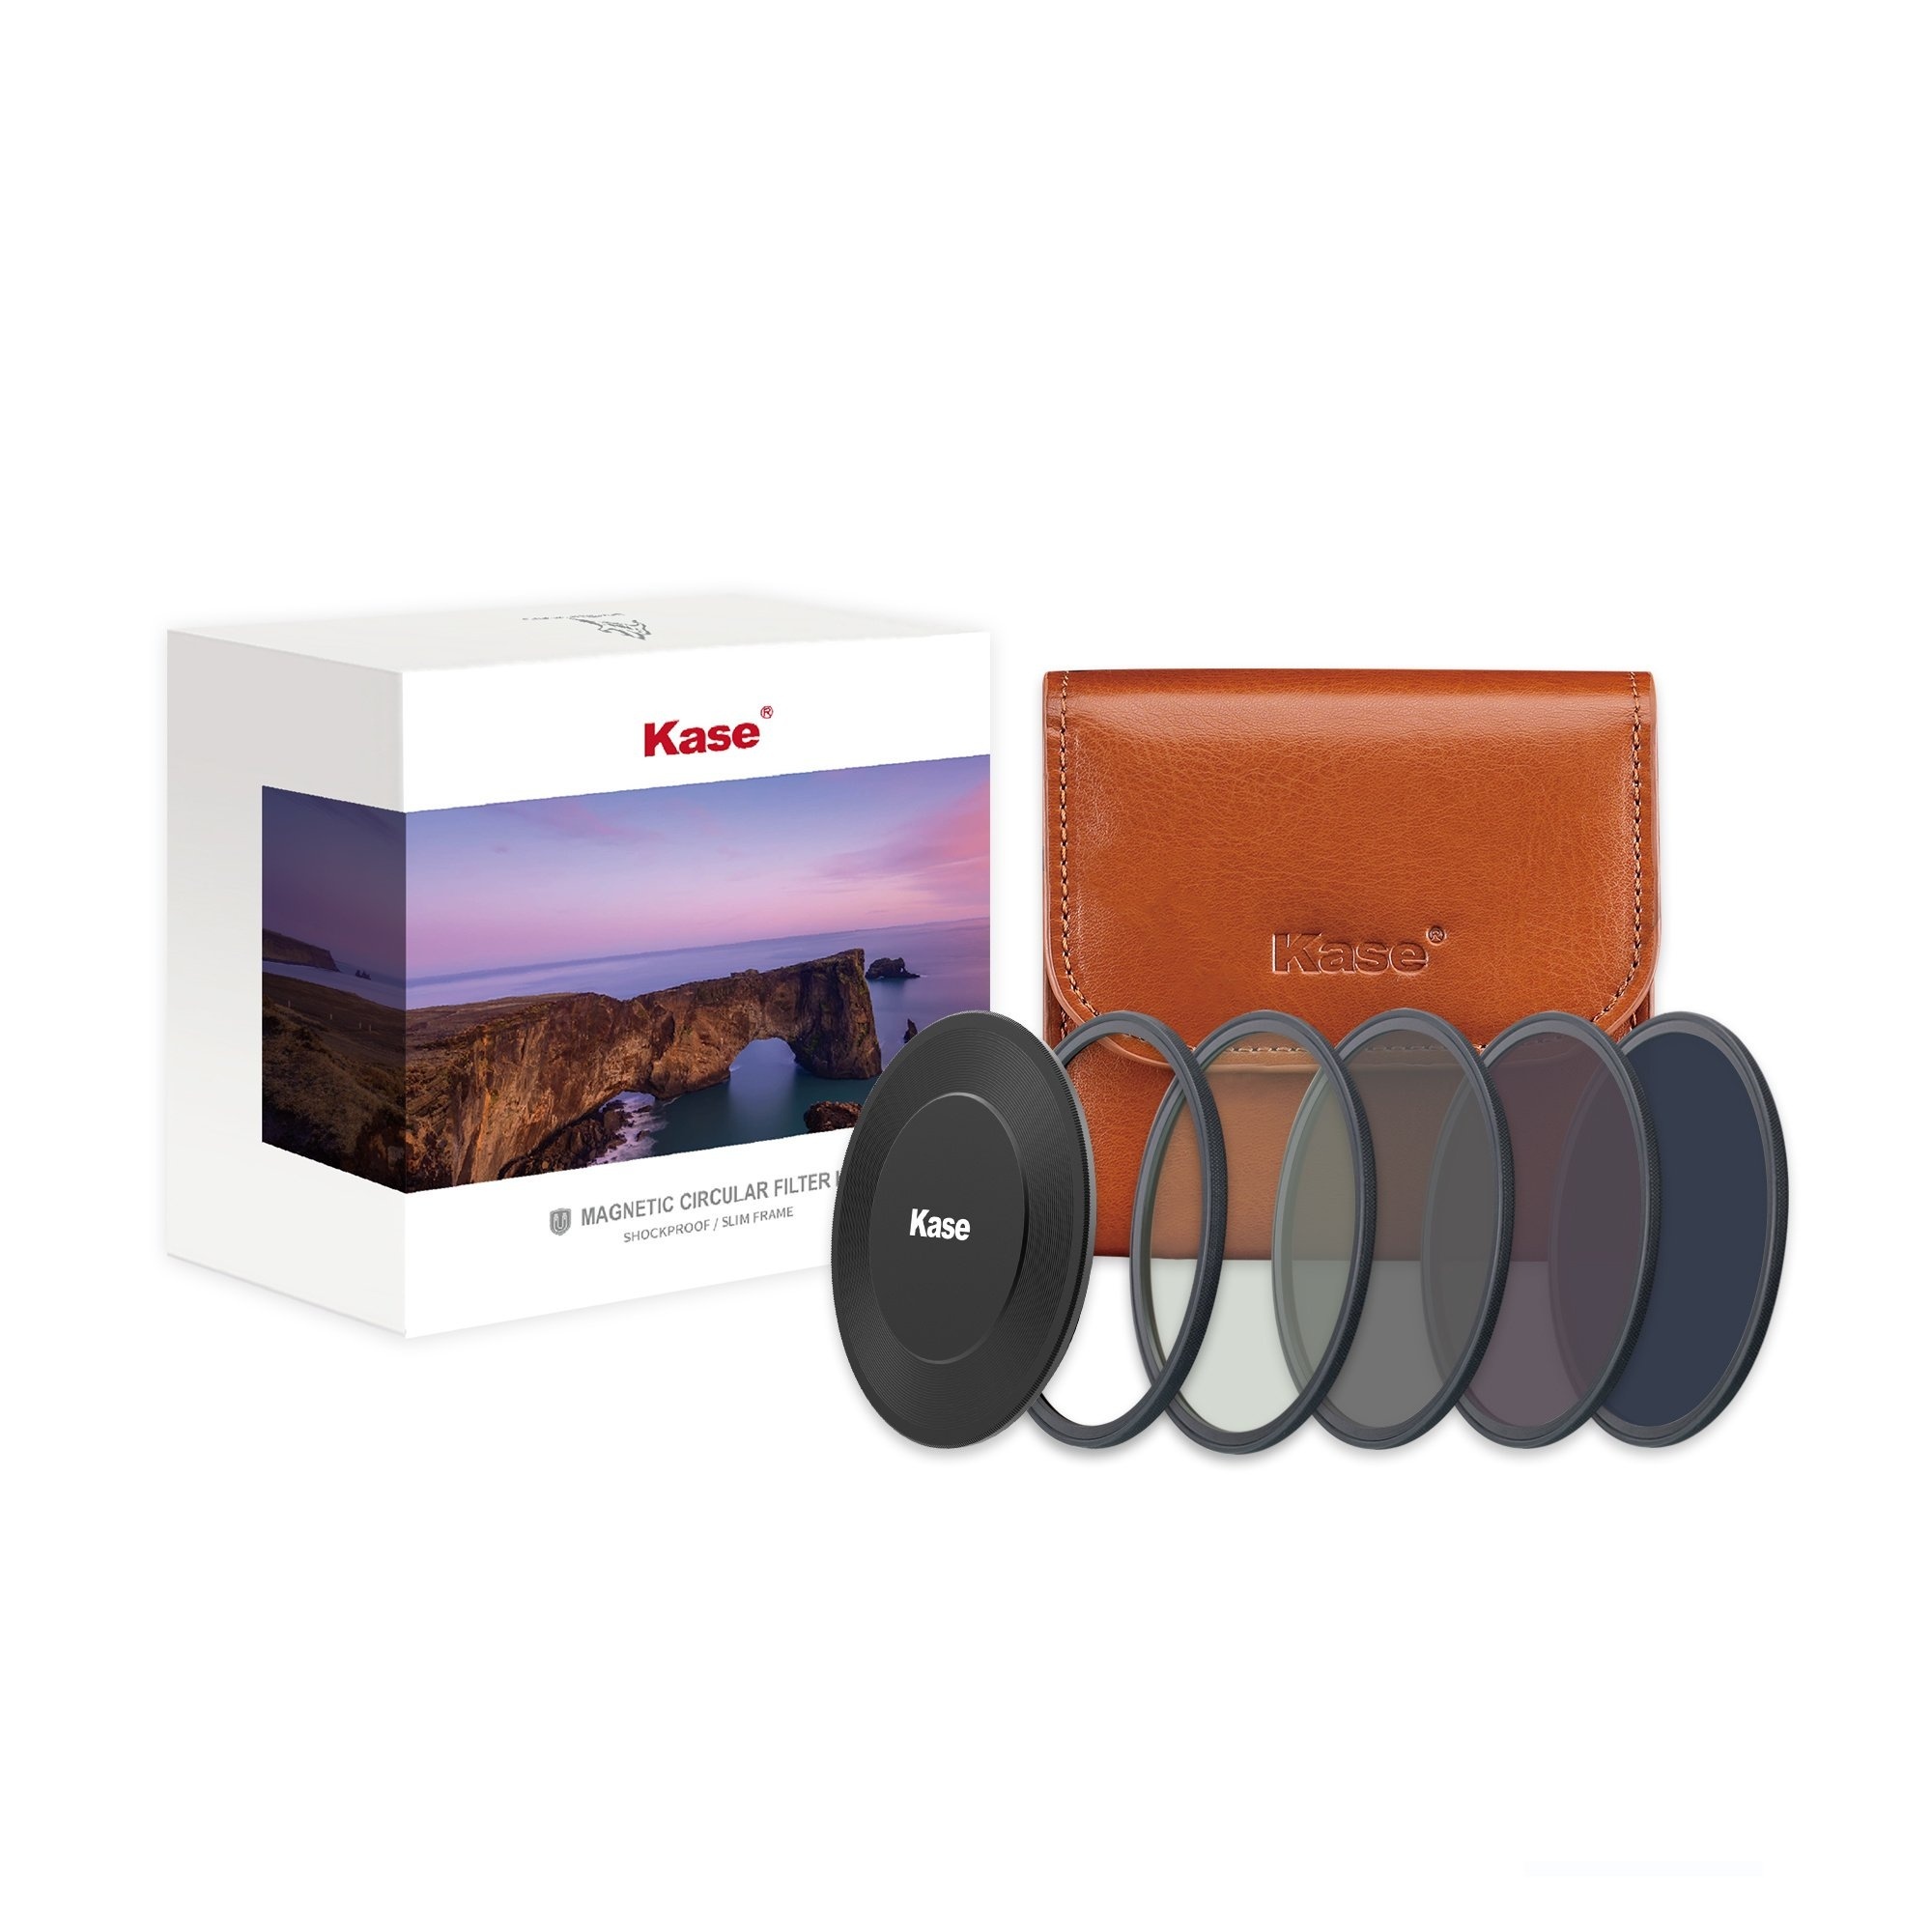 Kase Wolverine Magnetic Circular Filters Professional ND Kit (58mm)